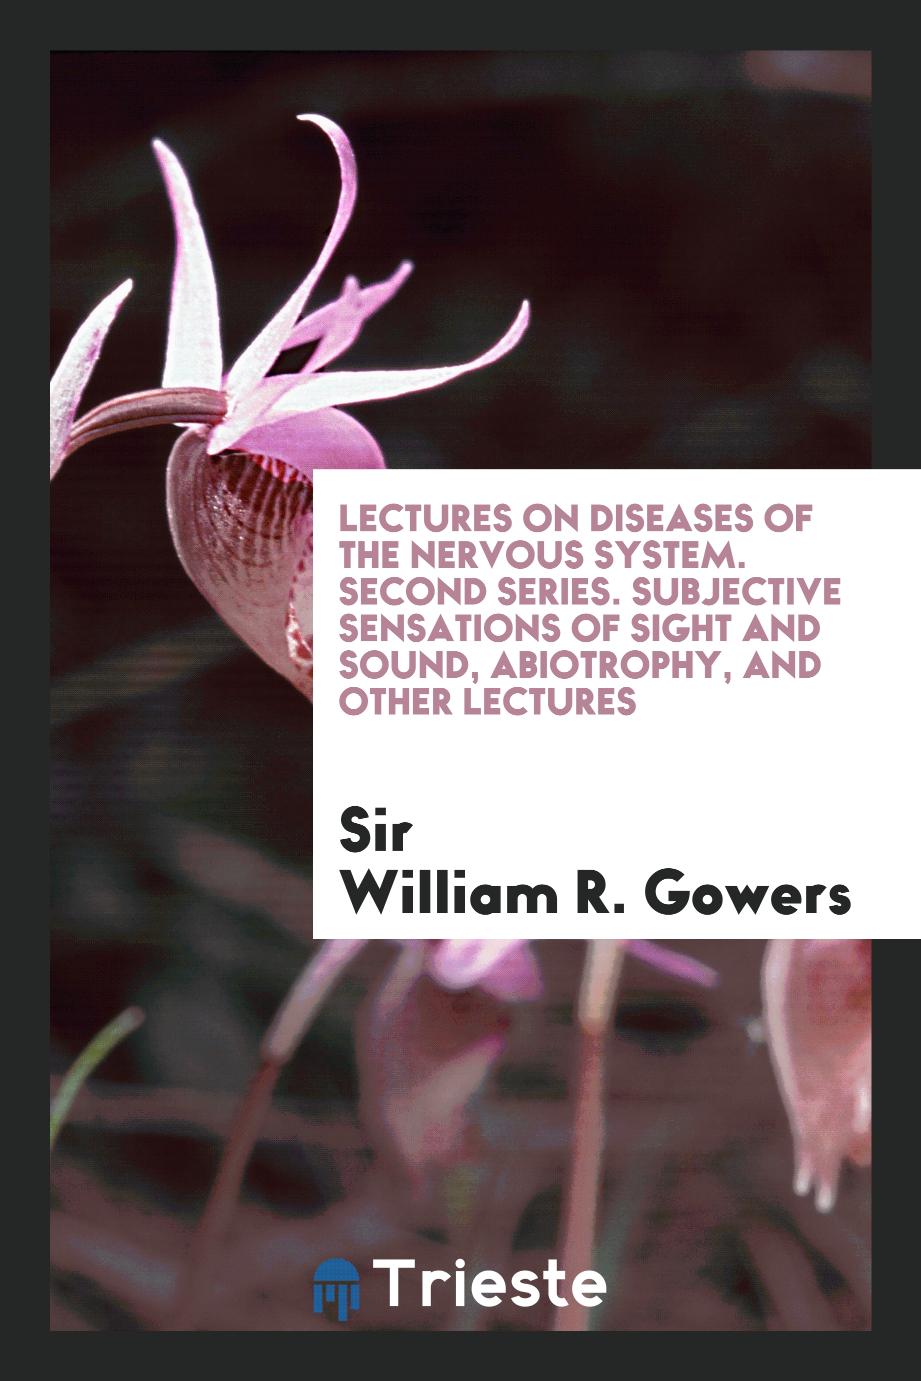 Lectures on Diseases of the Nervous System. Second Series. Subjective Sensations of Sight and Sound, Abiotrophy, and Other Lectures